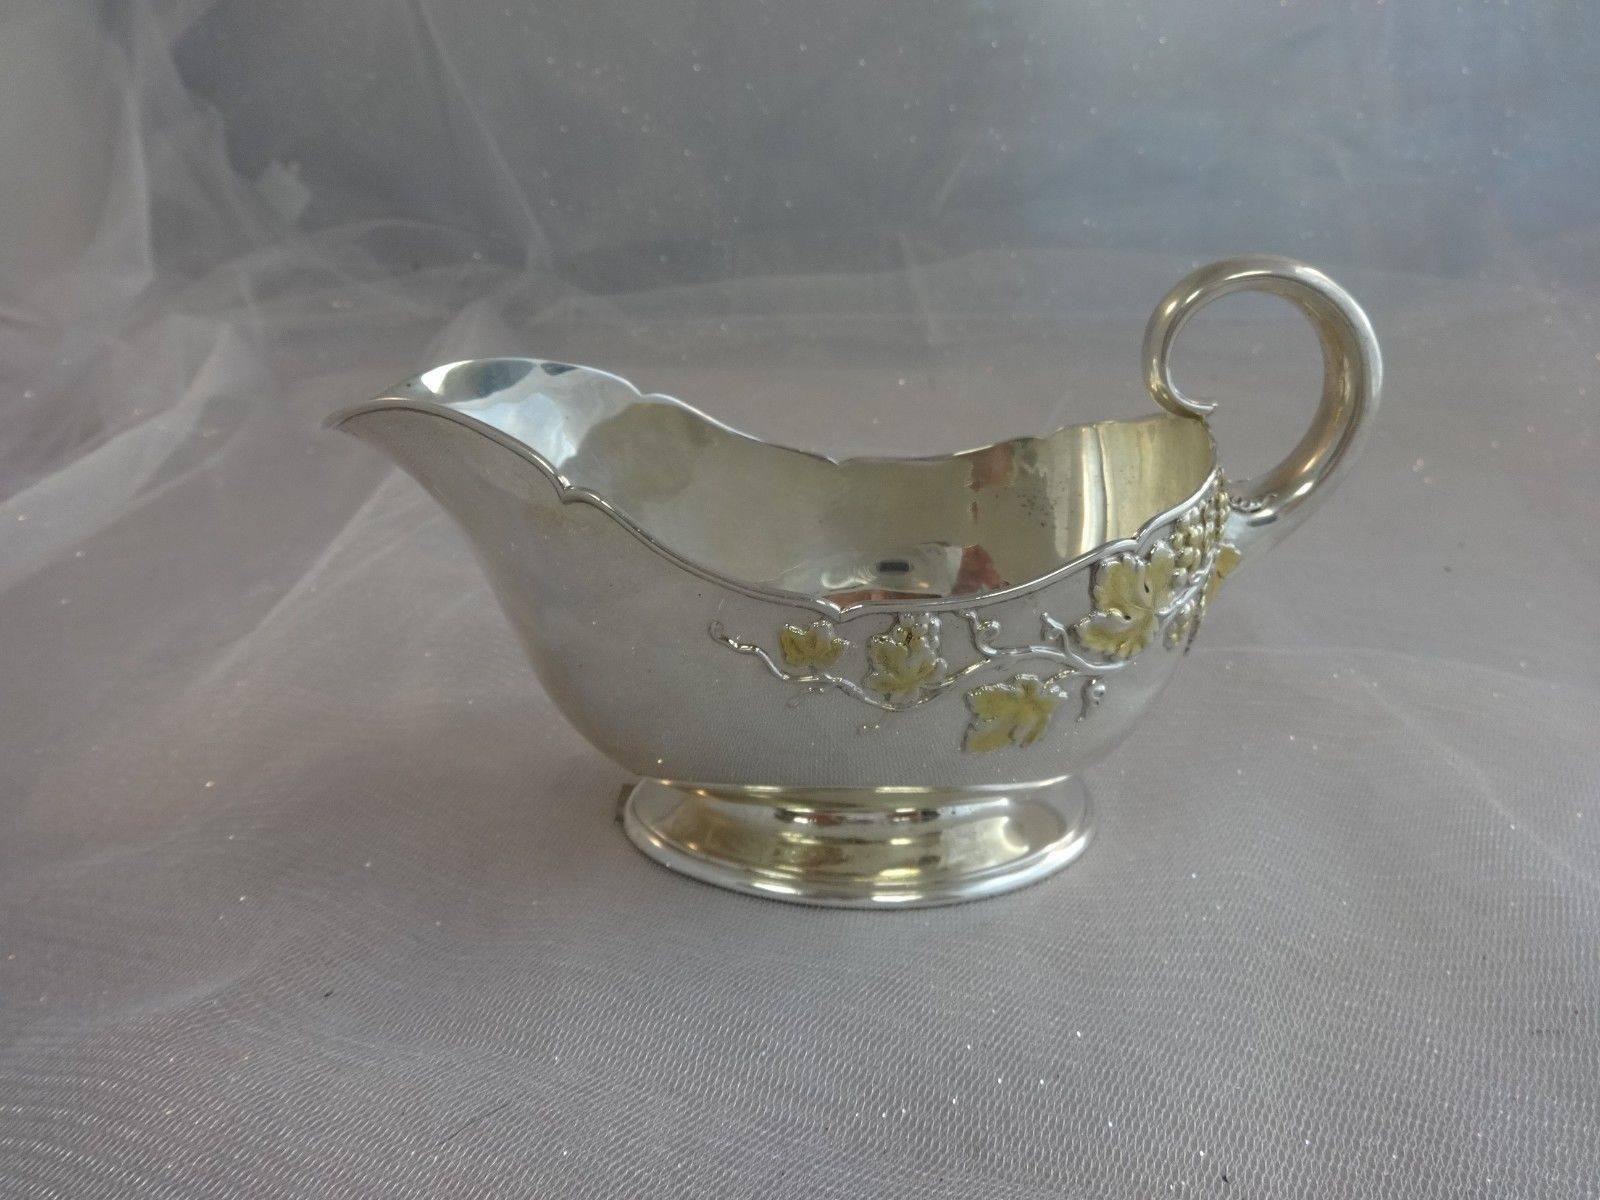 Mixed metals by Tiffany & Co.

Mixed metals by Tiffany & Co. sterling gravy boat with applied gilt grapes and leaves on vines. The piece is stamped with a 